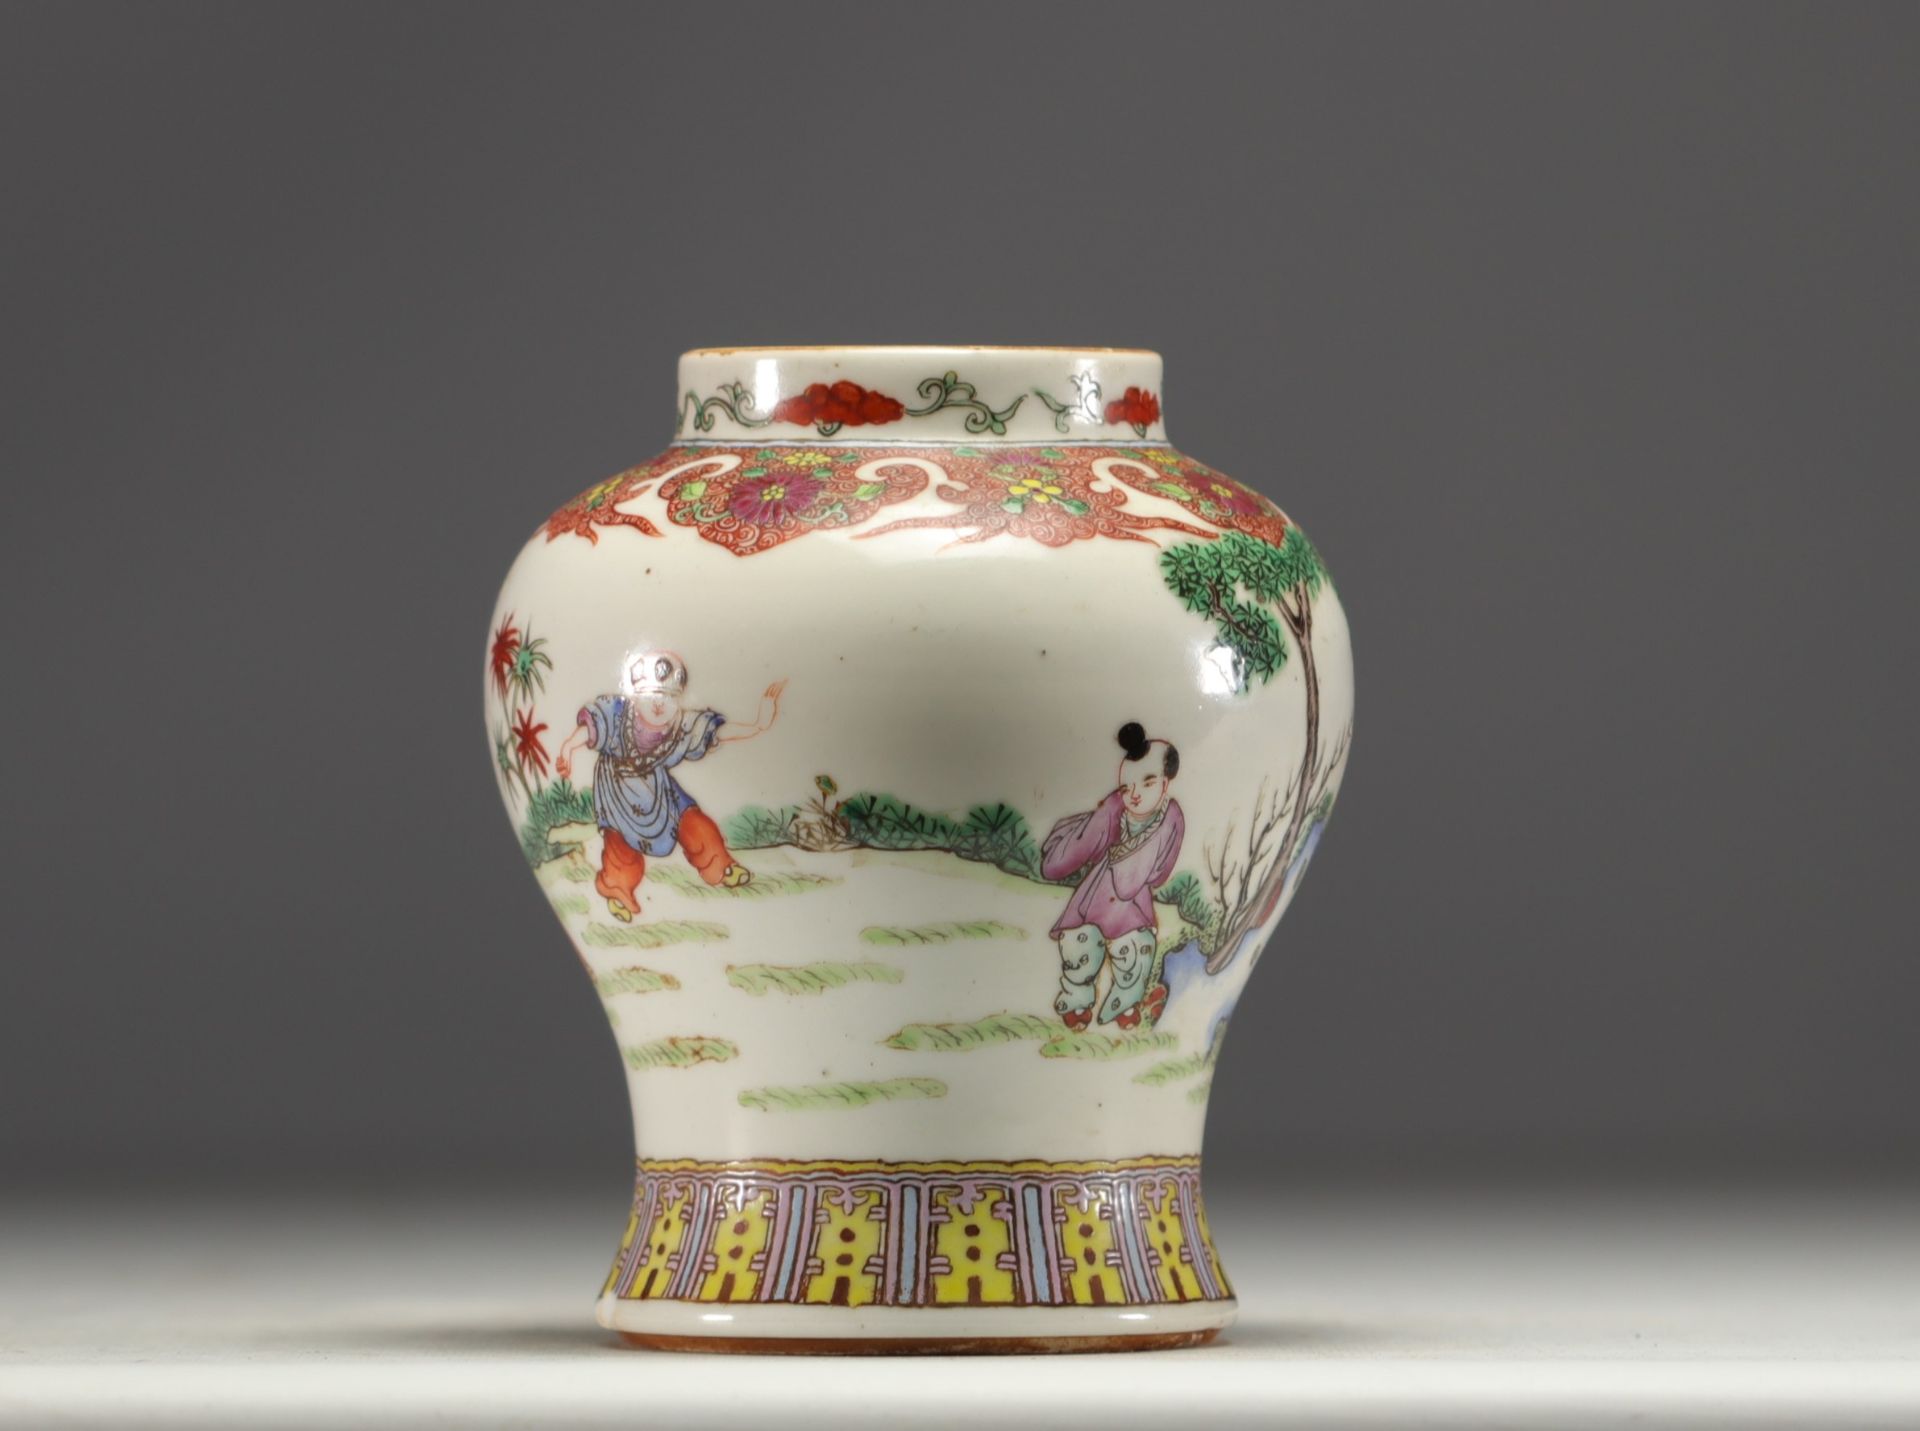 China - Famille rose porcelain vase decorated with women and children. - Image 3 of 4